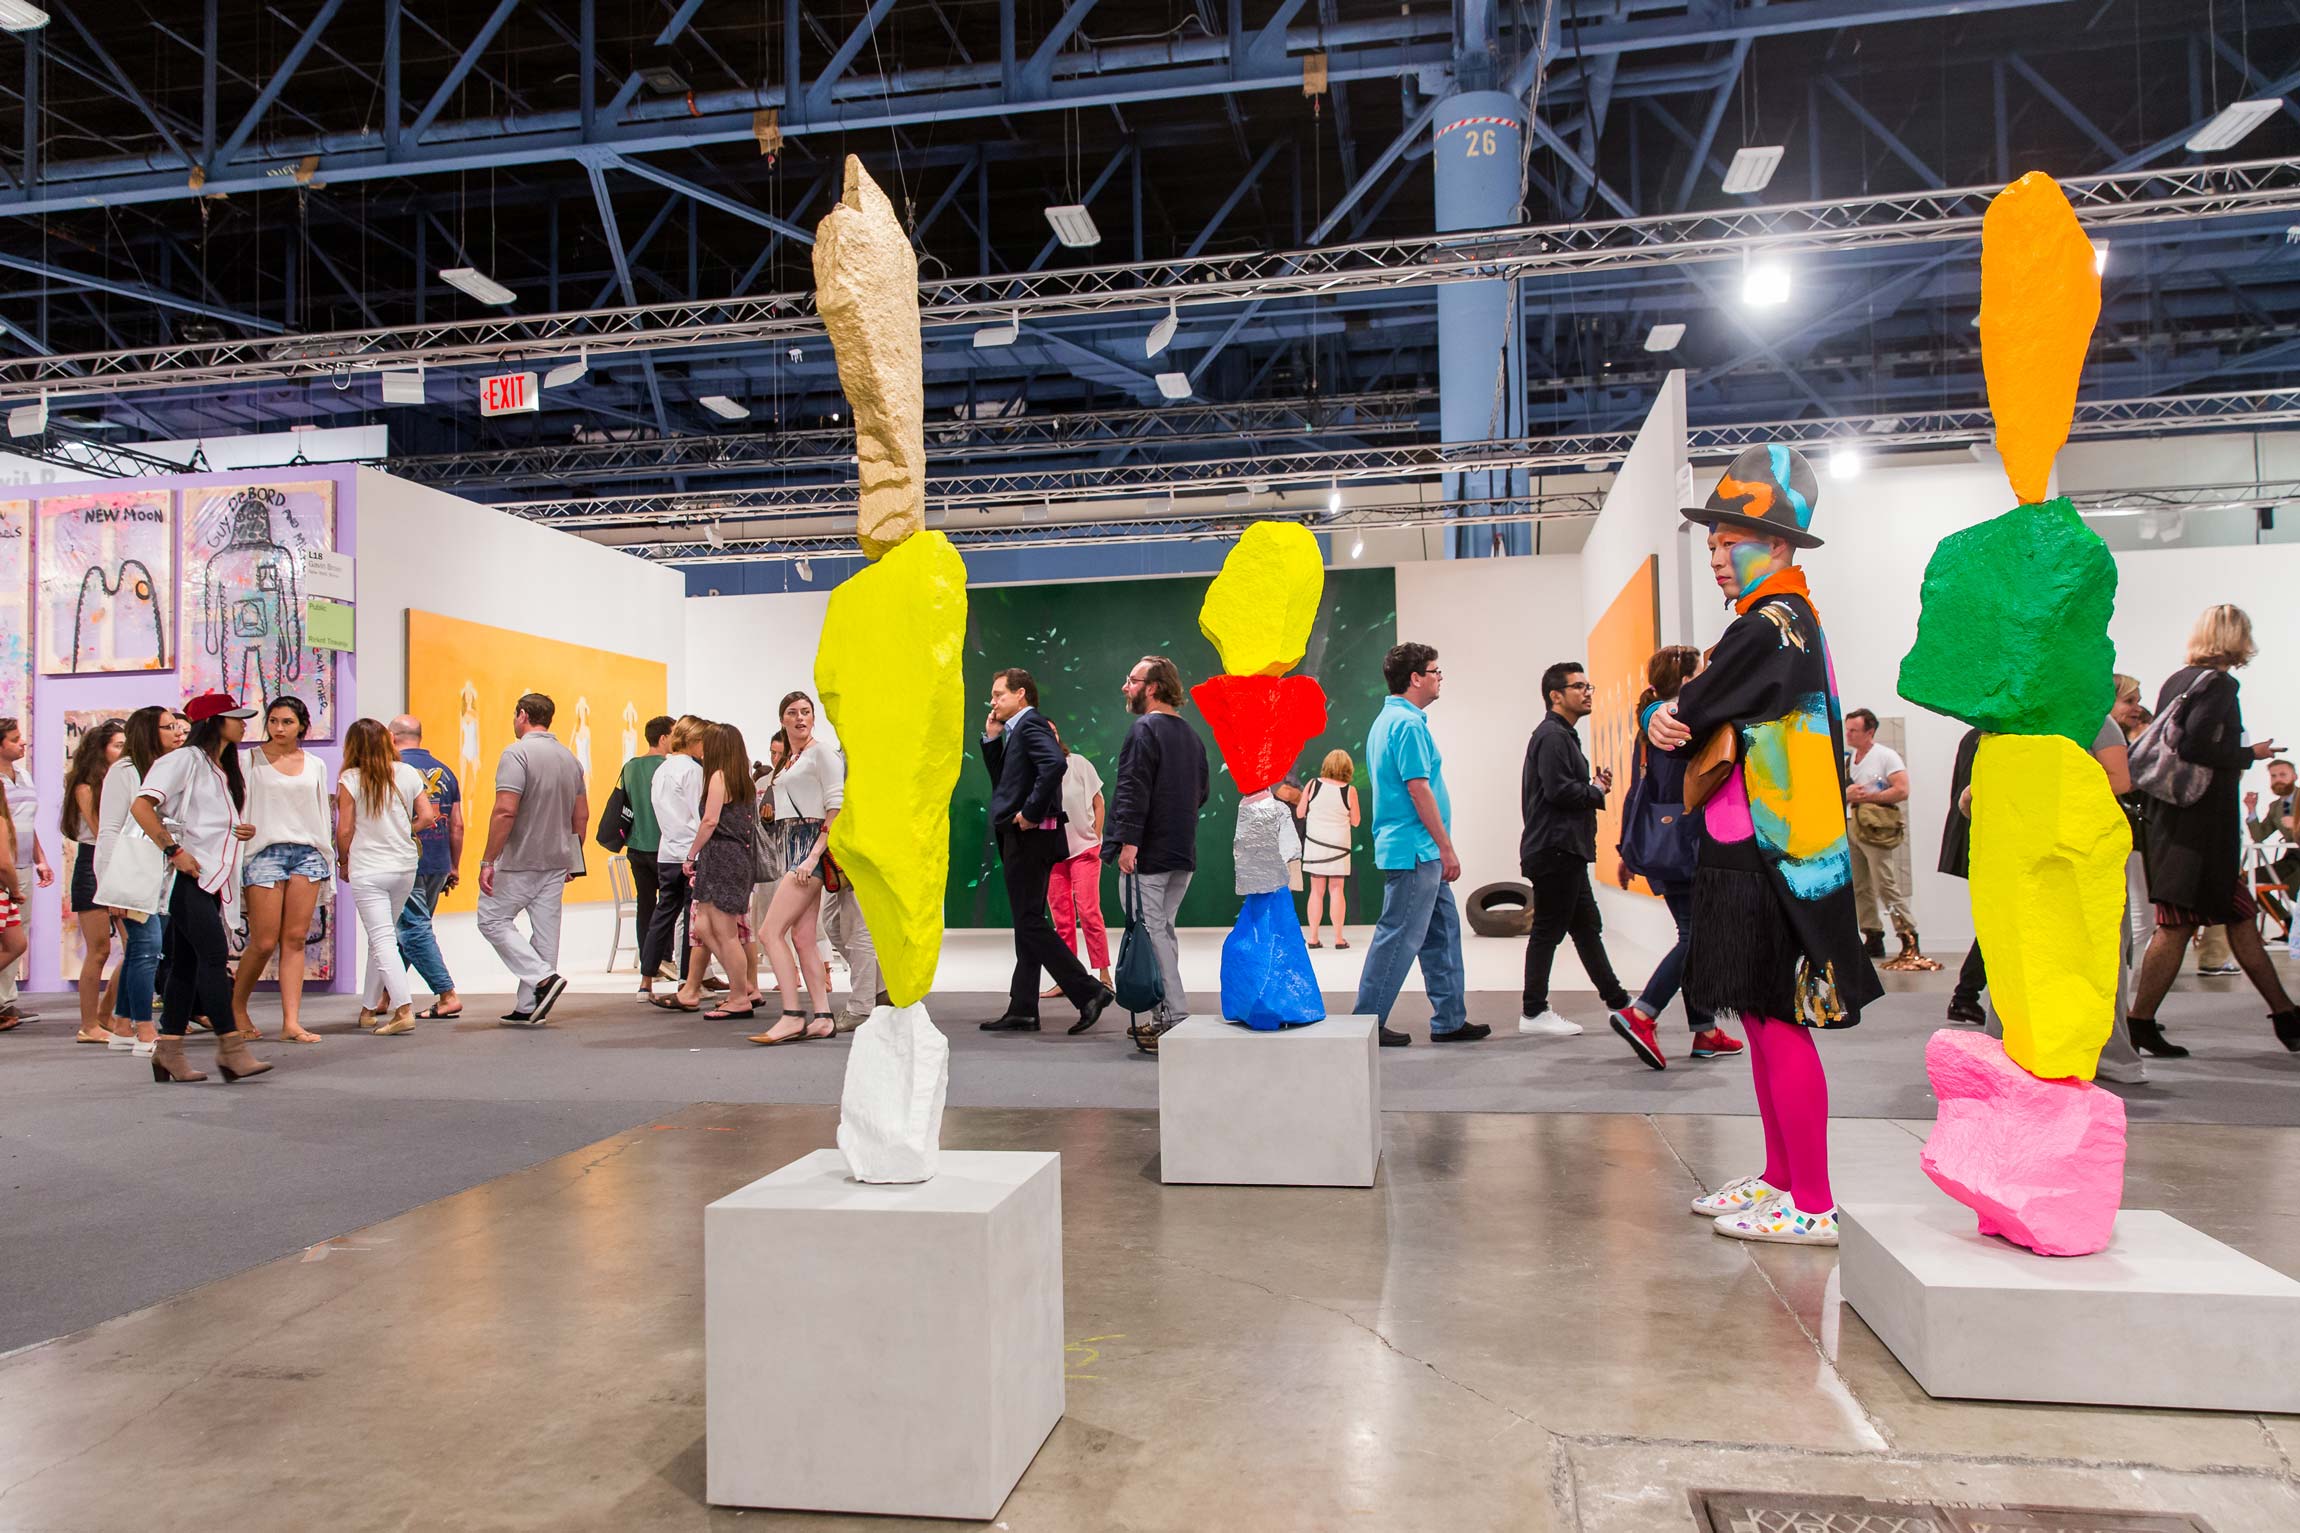 Miami Art Week 2022 kicks off Nov 29 to Dec 4, with Art Basel as its main attraction